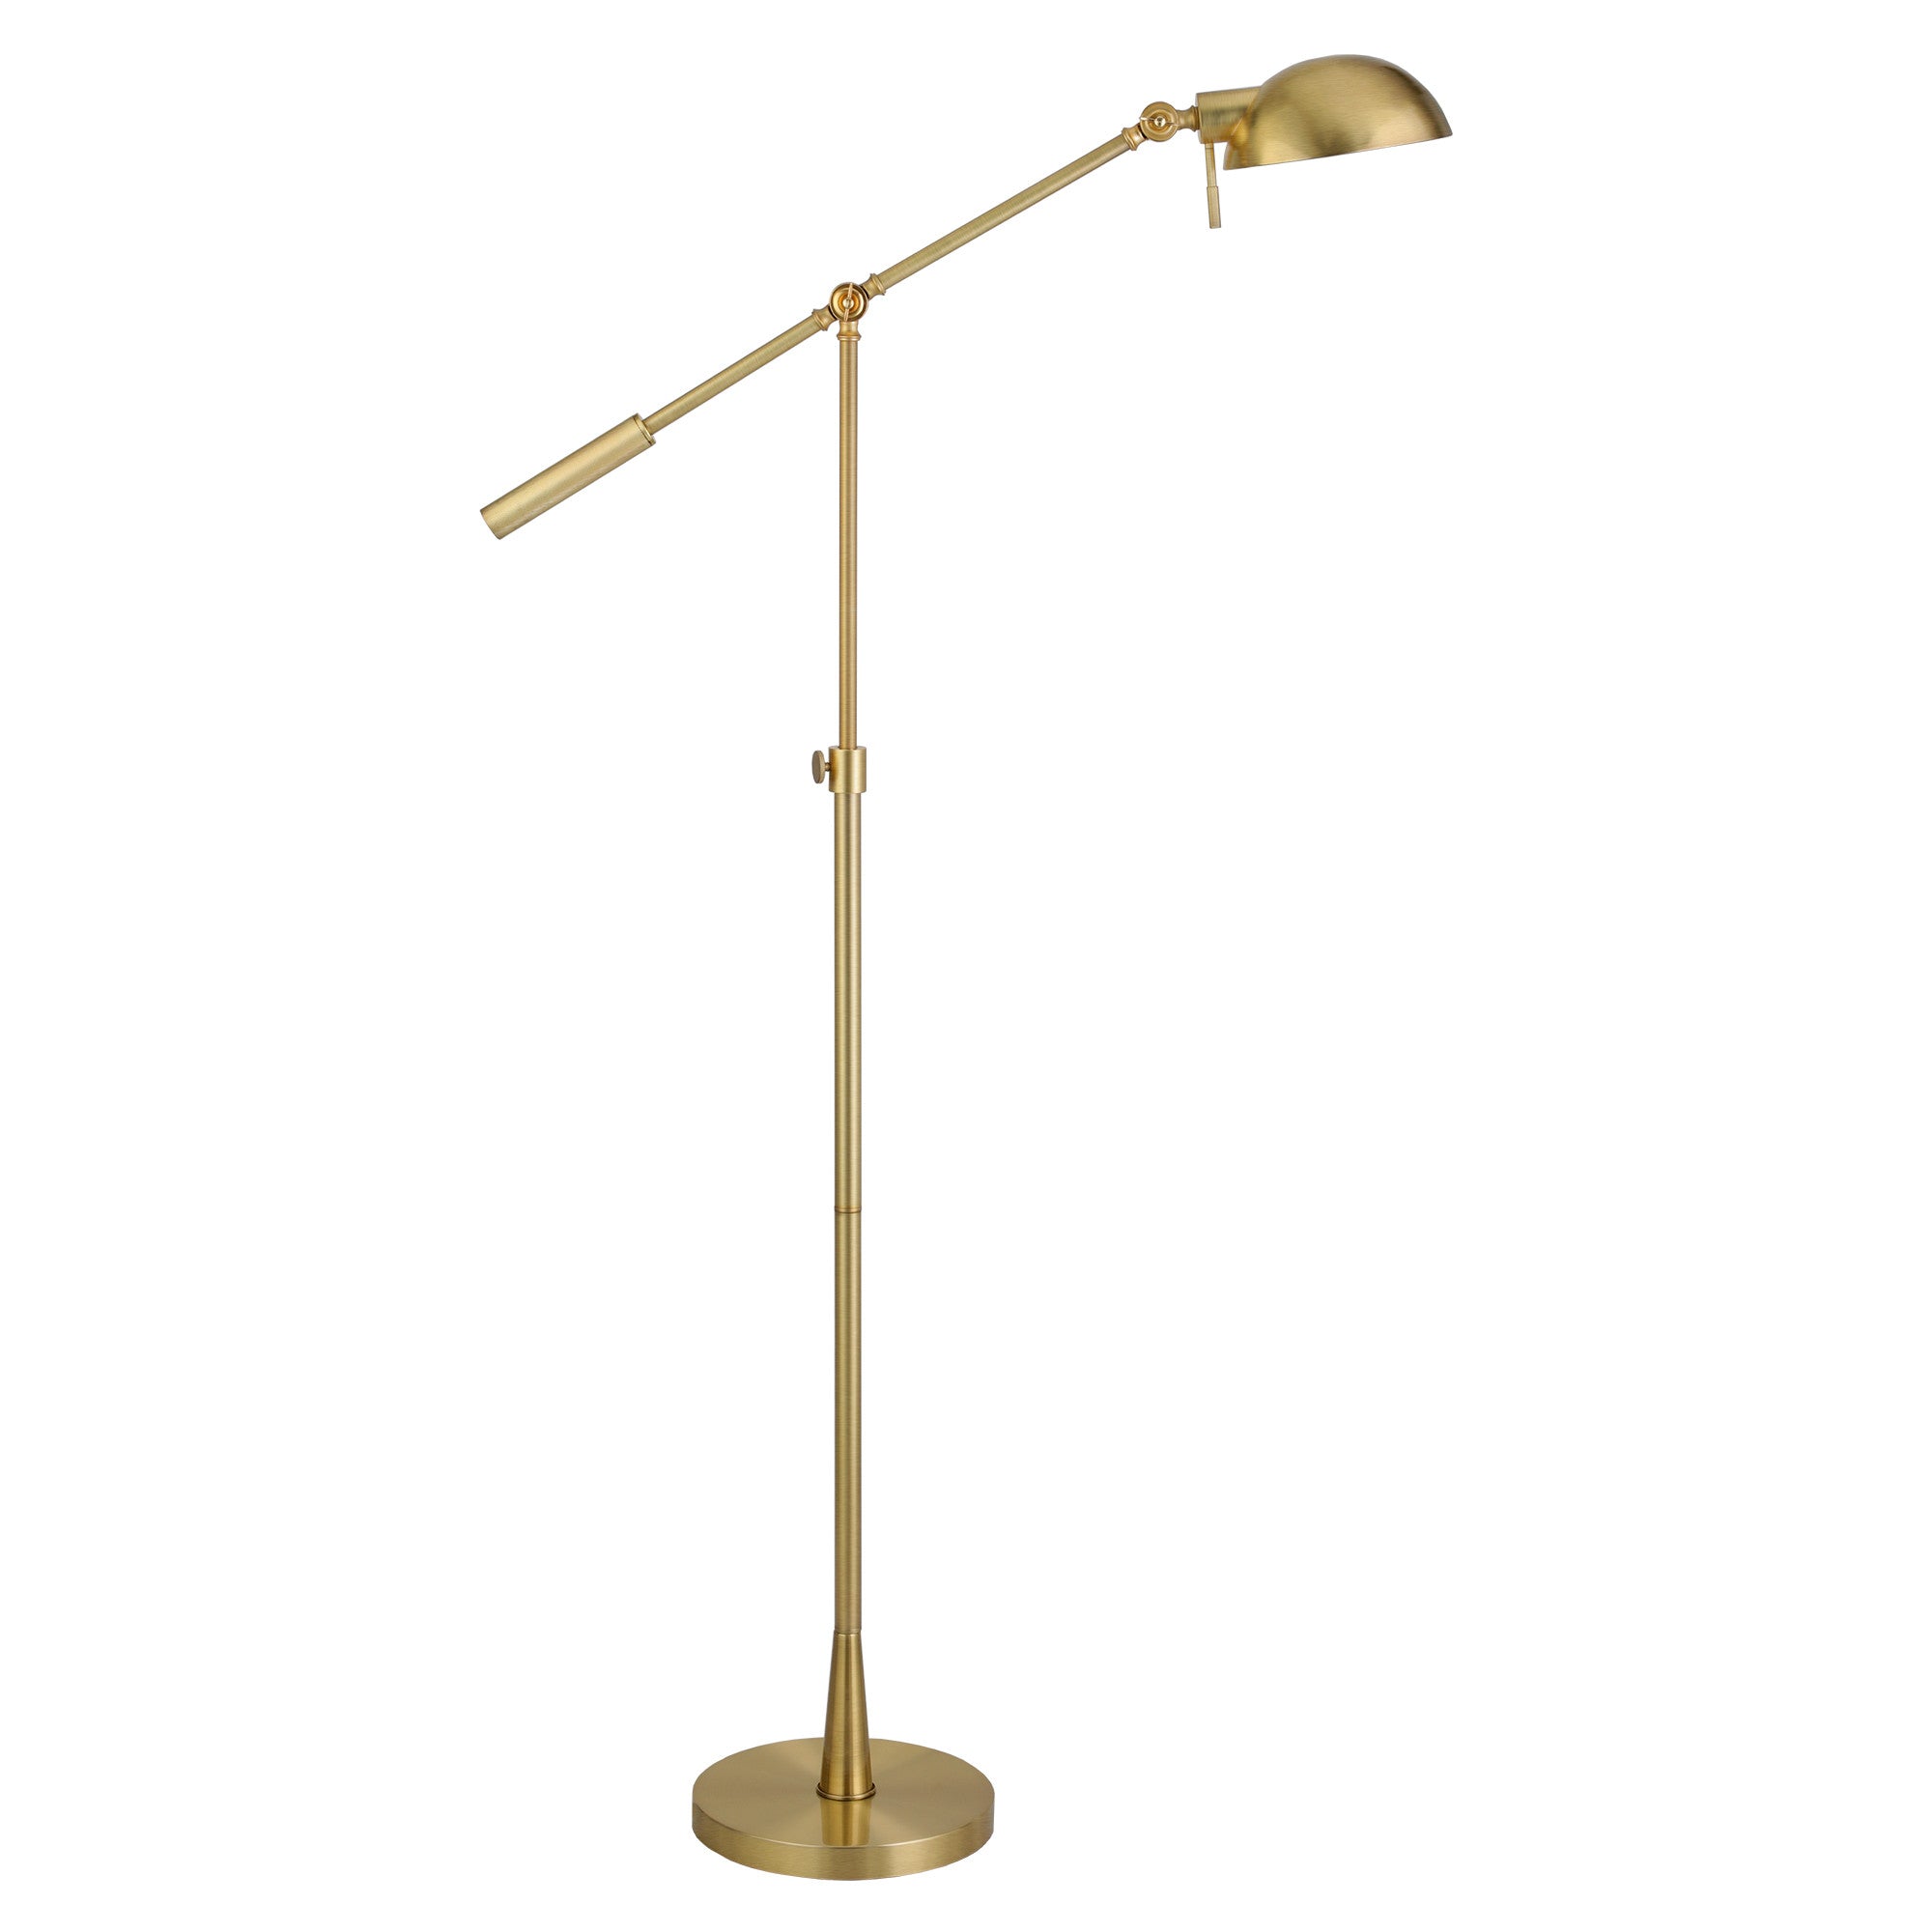 61" Brass Adjustable Swing Arm Floor Lamp With Gold Cone Shade